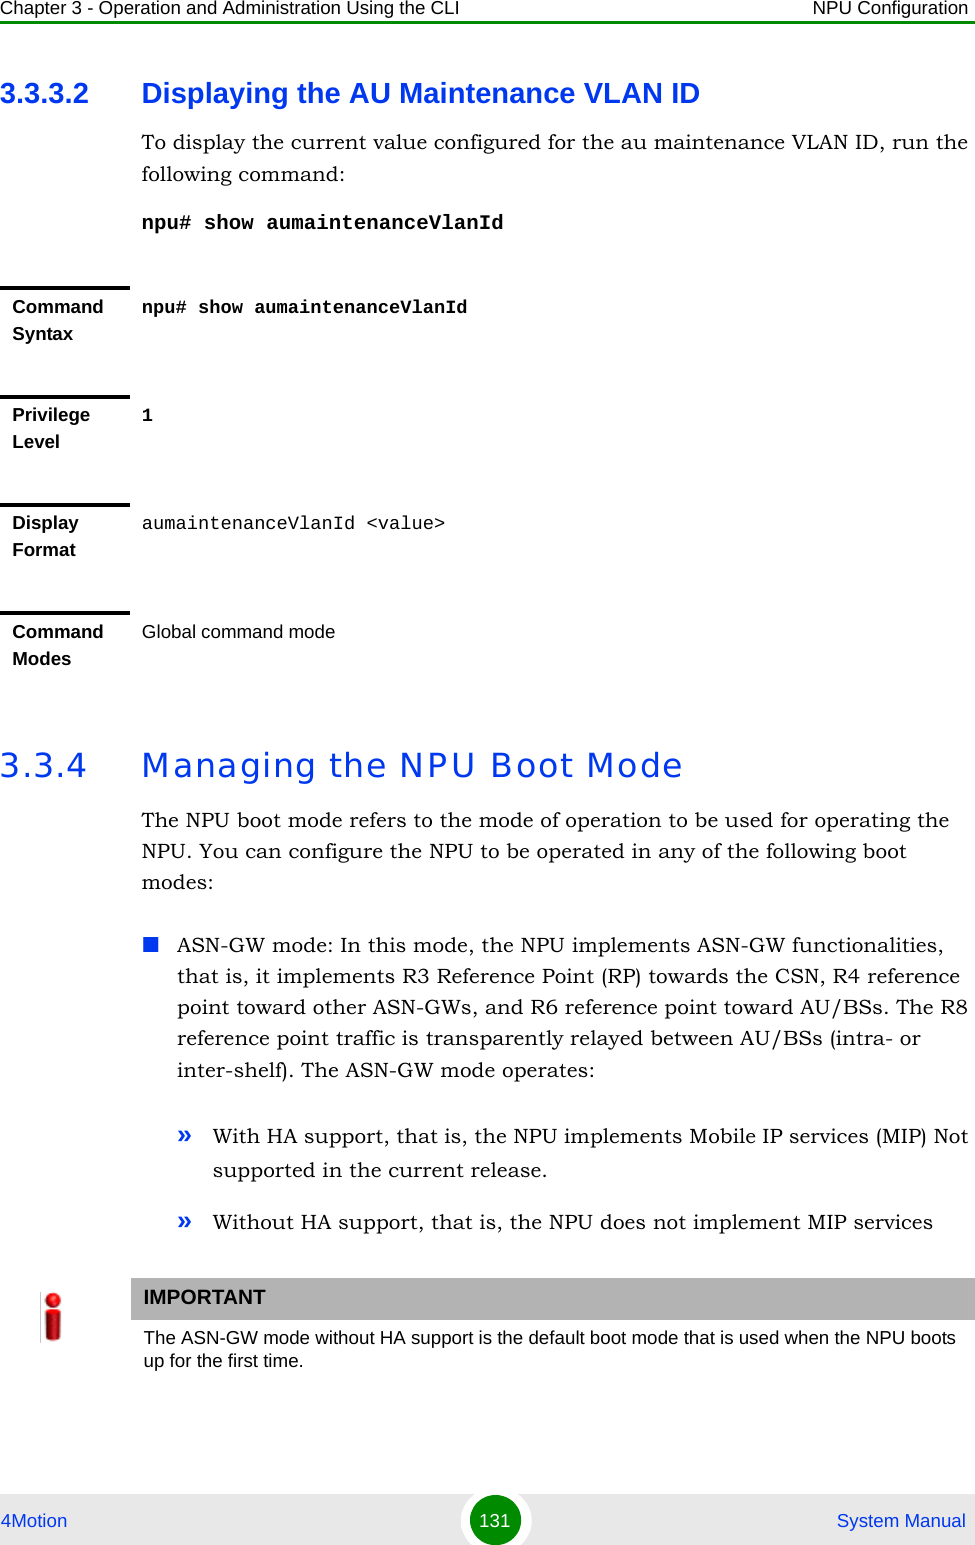 Chapter 3 - Operation and Administration Using the CLI NPU Configuration4Motion 131  System Manual3.3.3.2 Displaying the AU Maintenance VLAN IDTo display the current value configured for the au maintenance VLAN ID, run the following command:npu# show aumaintenanceVlanId3.3.4 Managing the NPU Boot ModeThe NPU boot mode refers to the mode of operation to be used for operating the NPU. You can configure the NPU to be operated in any of the following boot modes:ASN-GW mode: In this mode, the NPU implements ASN-GW functionalities, that is, it implements R3 Reference Point (RP) towards the CSN, R4 reference point toward other ASN-GWs, and R6 reference point toward AU/BSs. The R8 reference point traffic is transparently relayed between AU/BSs (intra- or inter-shelf). The ASN-GW mode operates:»With HA support, that is, the NPU implements Mobile IP services (MIP) Not supported in the current release.»Without HA support, that is, the NPU does not implement MIP servicesCommand Syntaxnpu# show aumaintenanceVlanIdPrivilege Level1Display FormataumaintenanceVlanId &lt;value&gt; Command ModesGlobal command modeIMPORTANTThe ASN-GW mode without HA support is the default boot mode that is used when the NPU boots up for the first time.